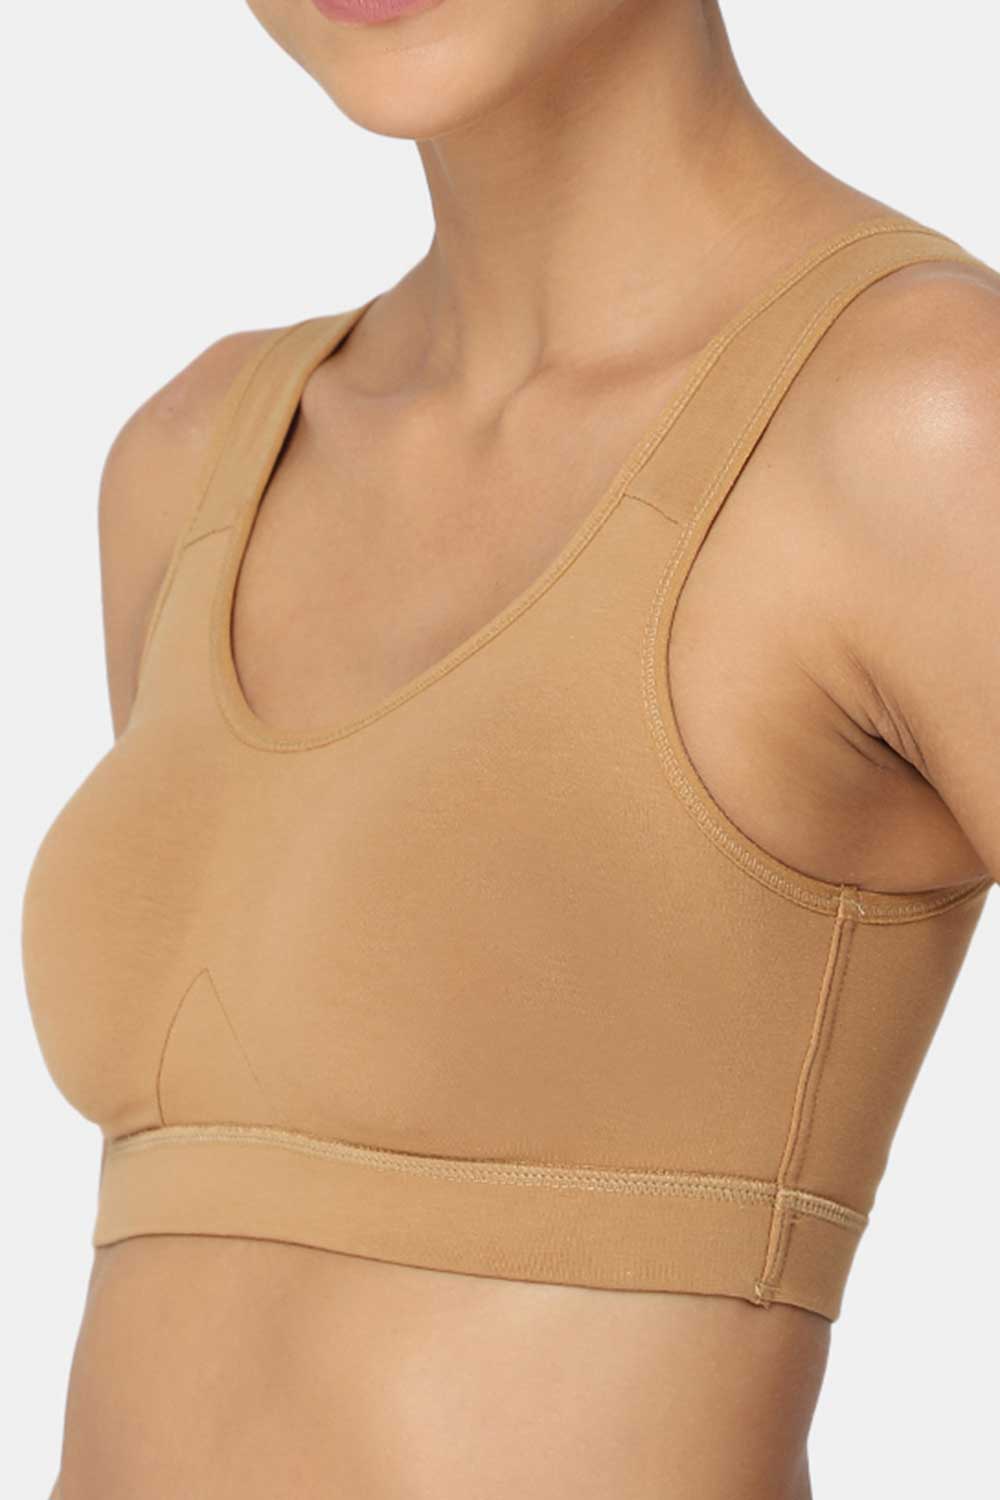 Cotton Non-Padded Jockey Sports Bra, Plain at Rs 37/piece in